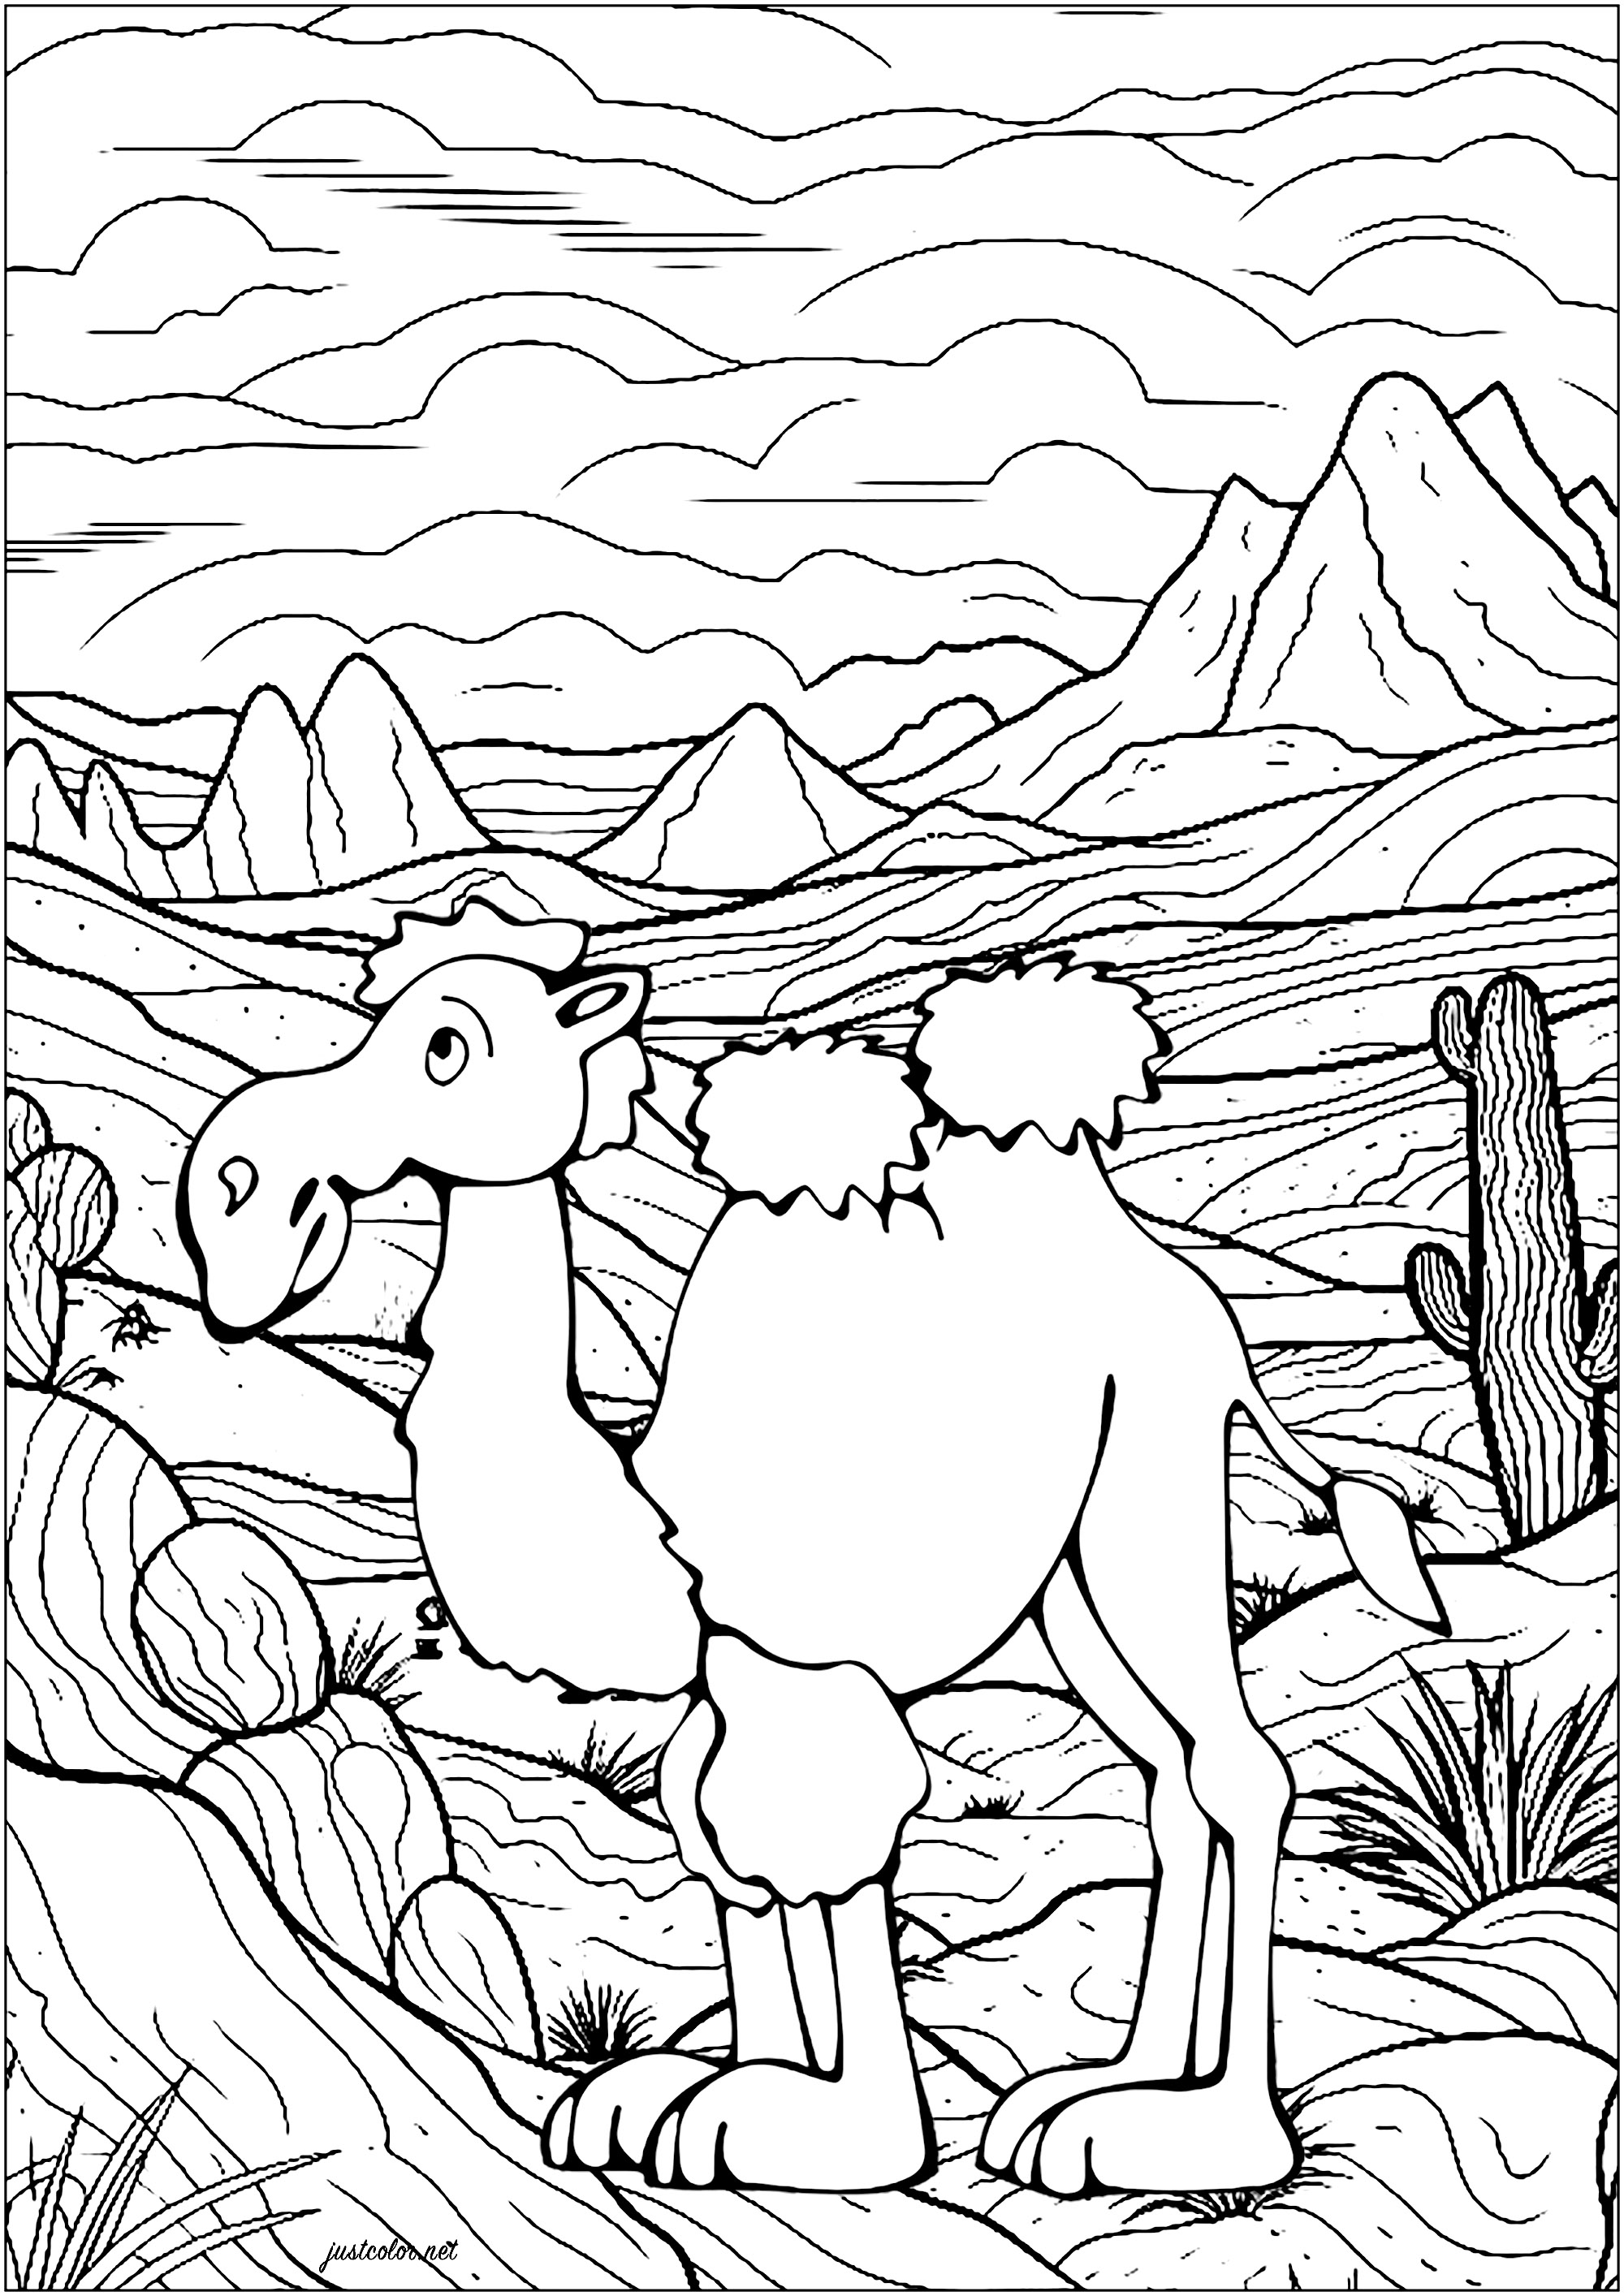 Camel in the desert. Coloring of a camel in the desert, with many details in the background: mountains, cactus, cloudy sky ...